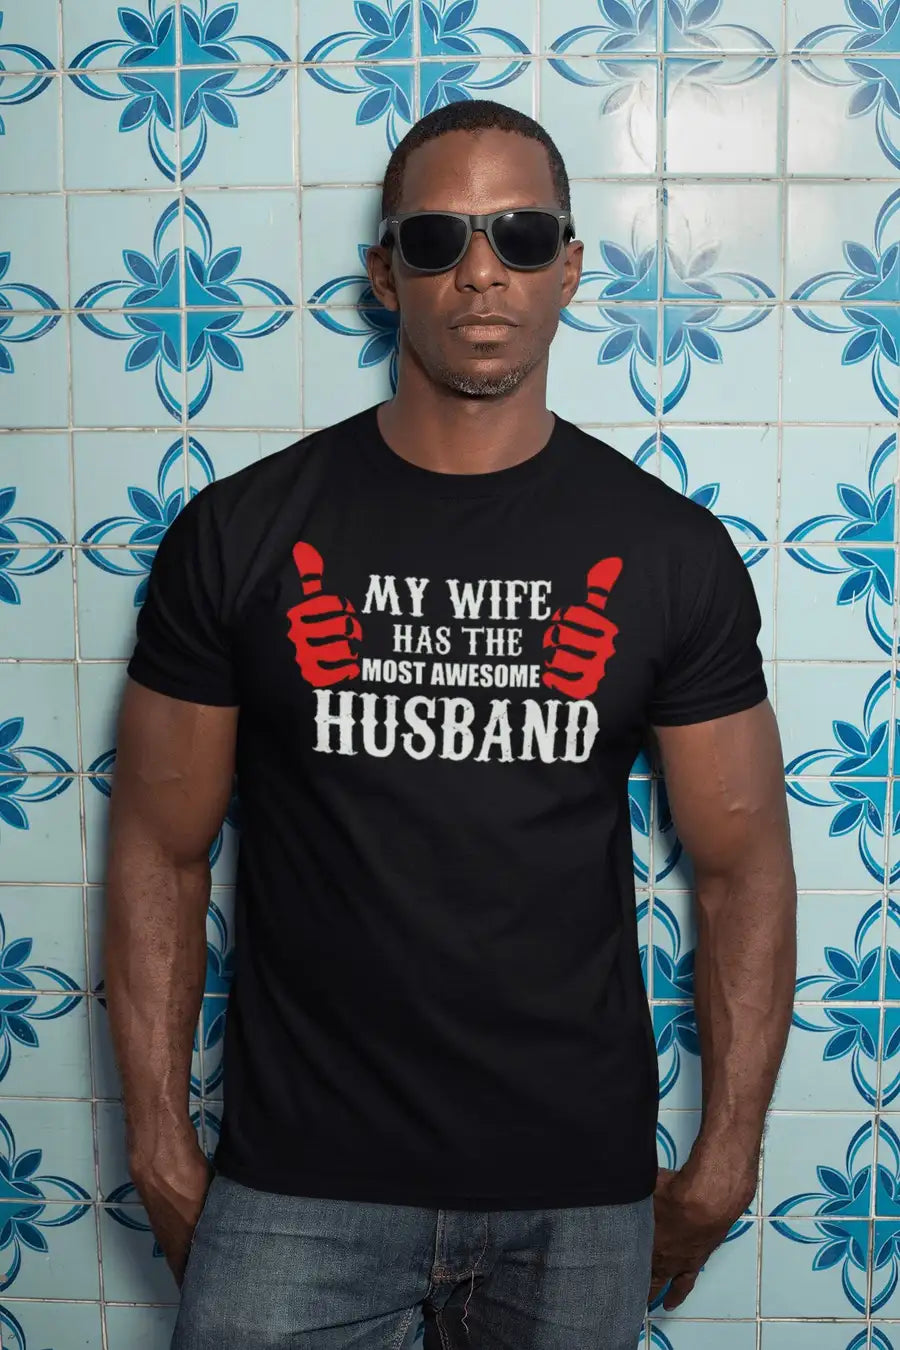 Most Awesome Husband Exclusive Black T Shirt / Hoodie for Men | Premium Design | Catch My Drift India - Catch My Drift India  black, clothing, couples, full sleeves, hoodie, hoodies, husband,